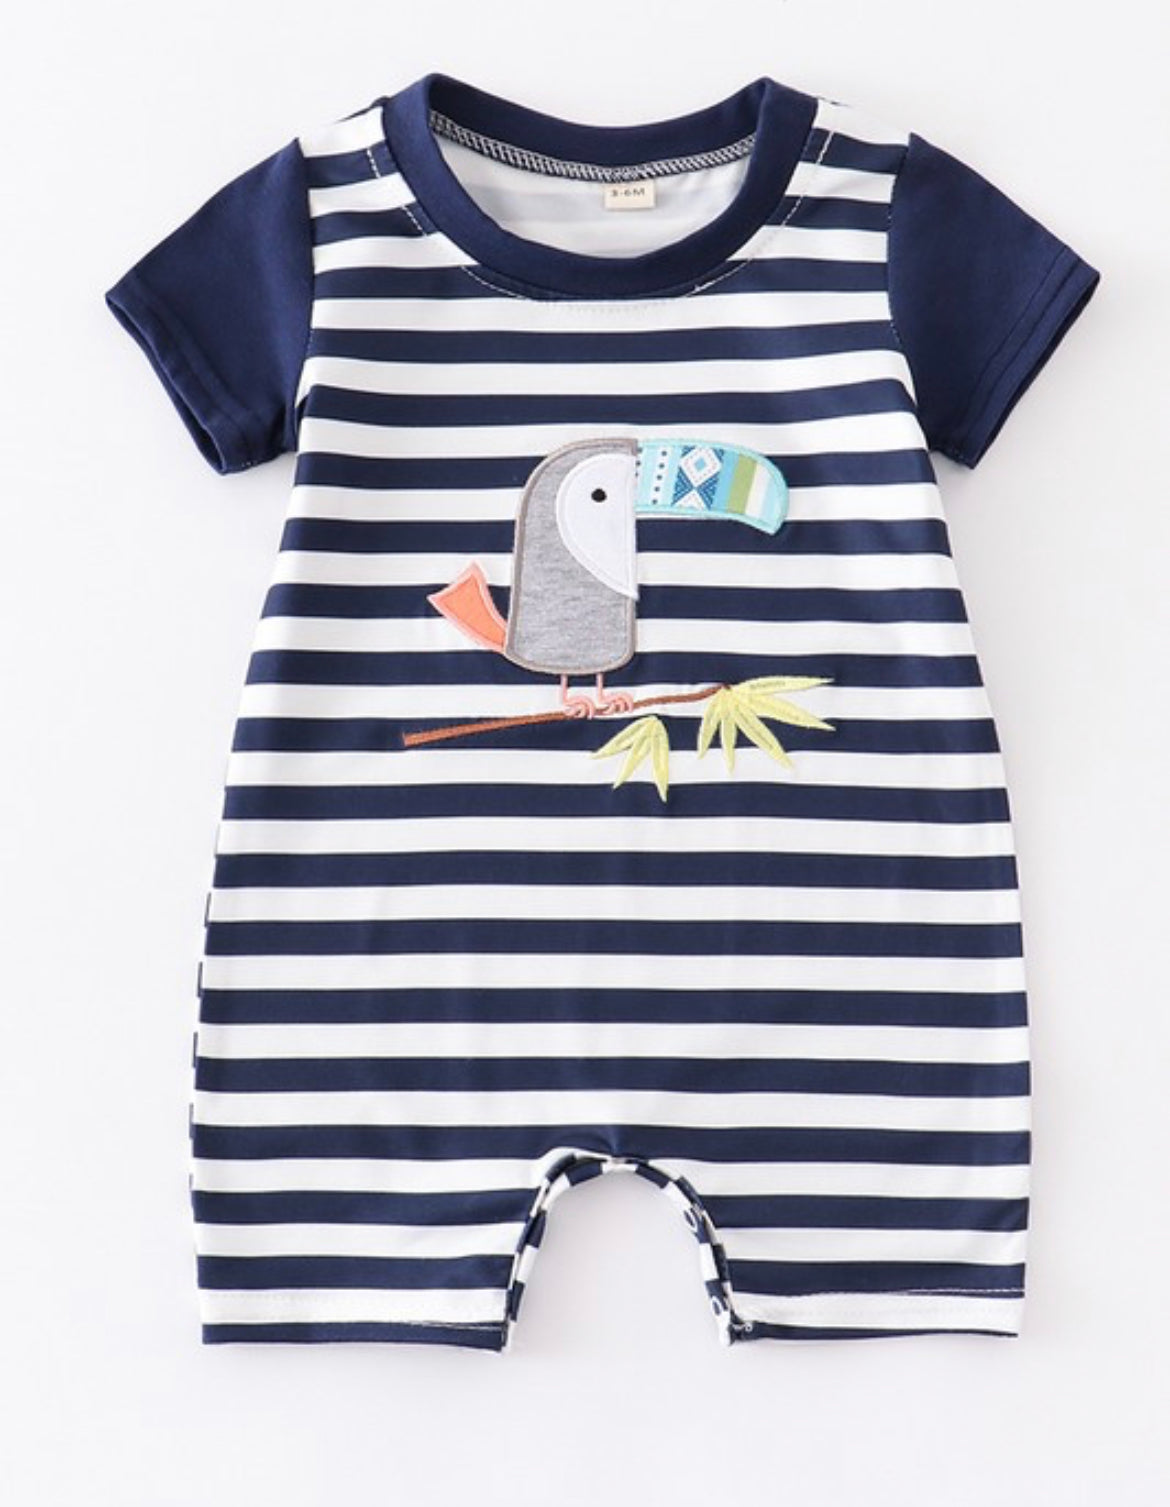 Navy Stripe Parrot Embroidery Romper